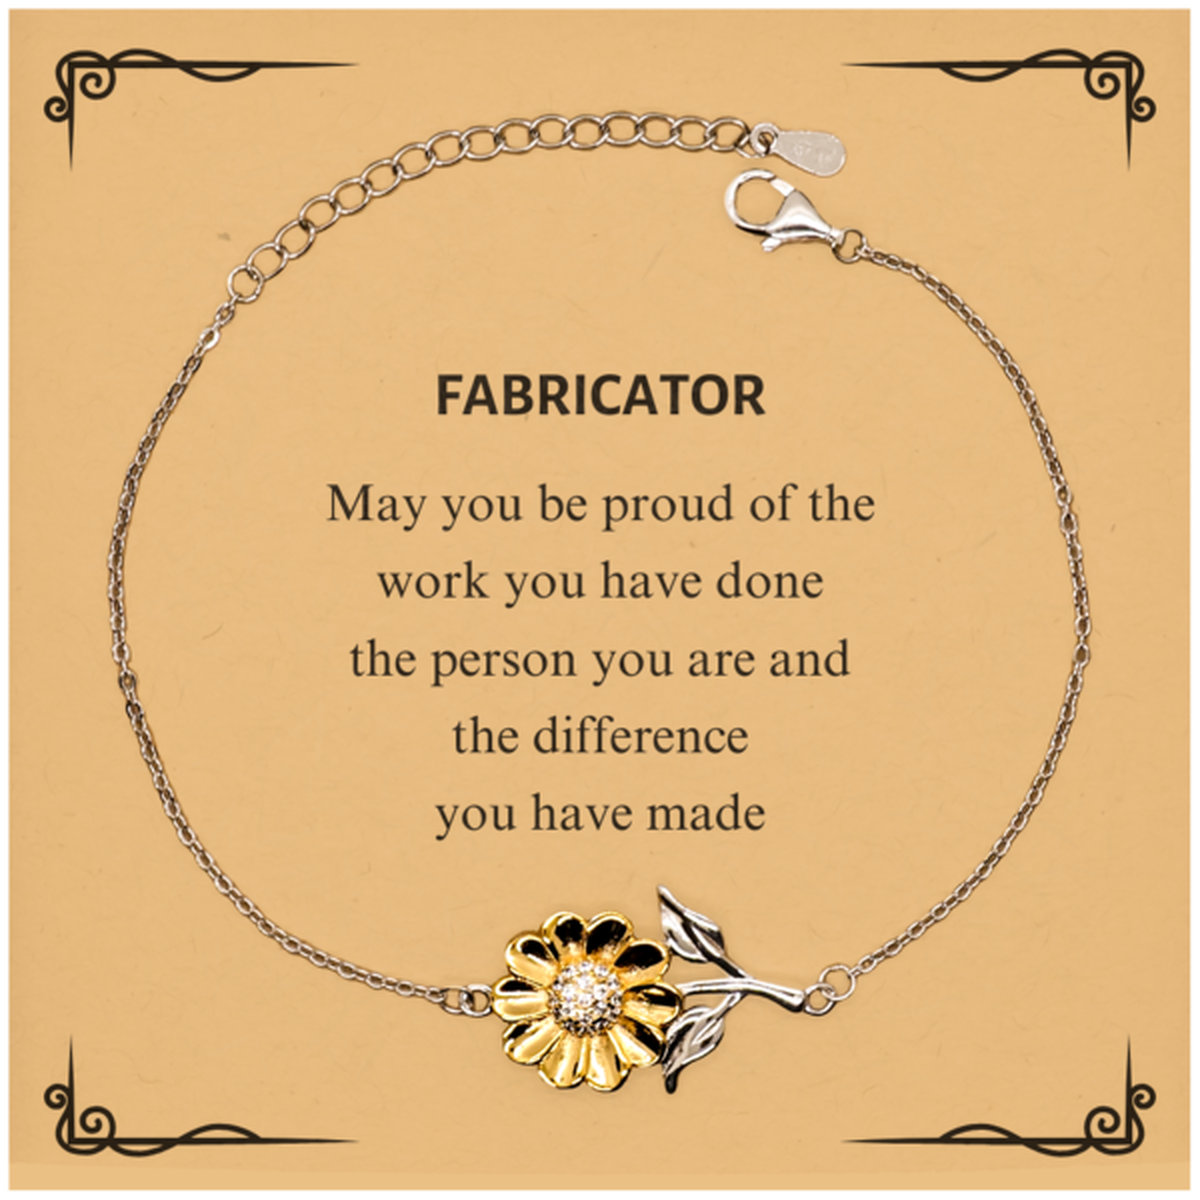 Fabricator May you be proud of the work you have done, Retirement Fabricator Sunflower Bracelet for Colleague Appreciation Gifts Amazing for Fabricator